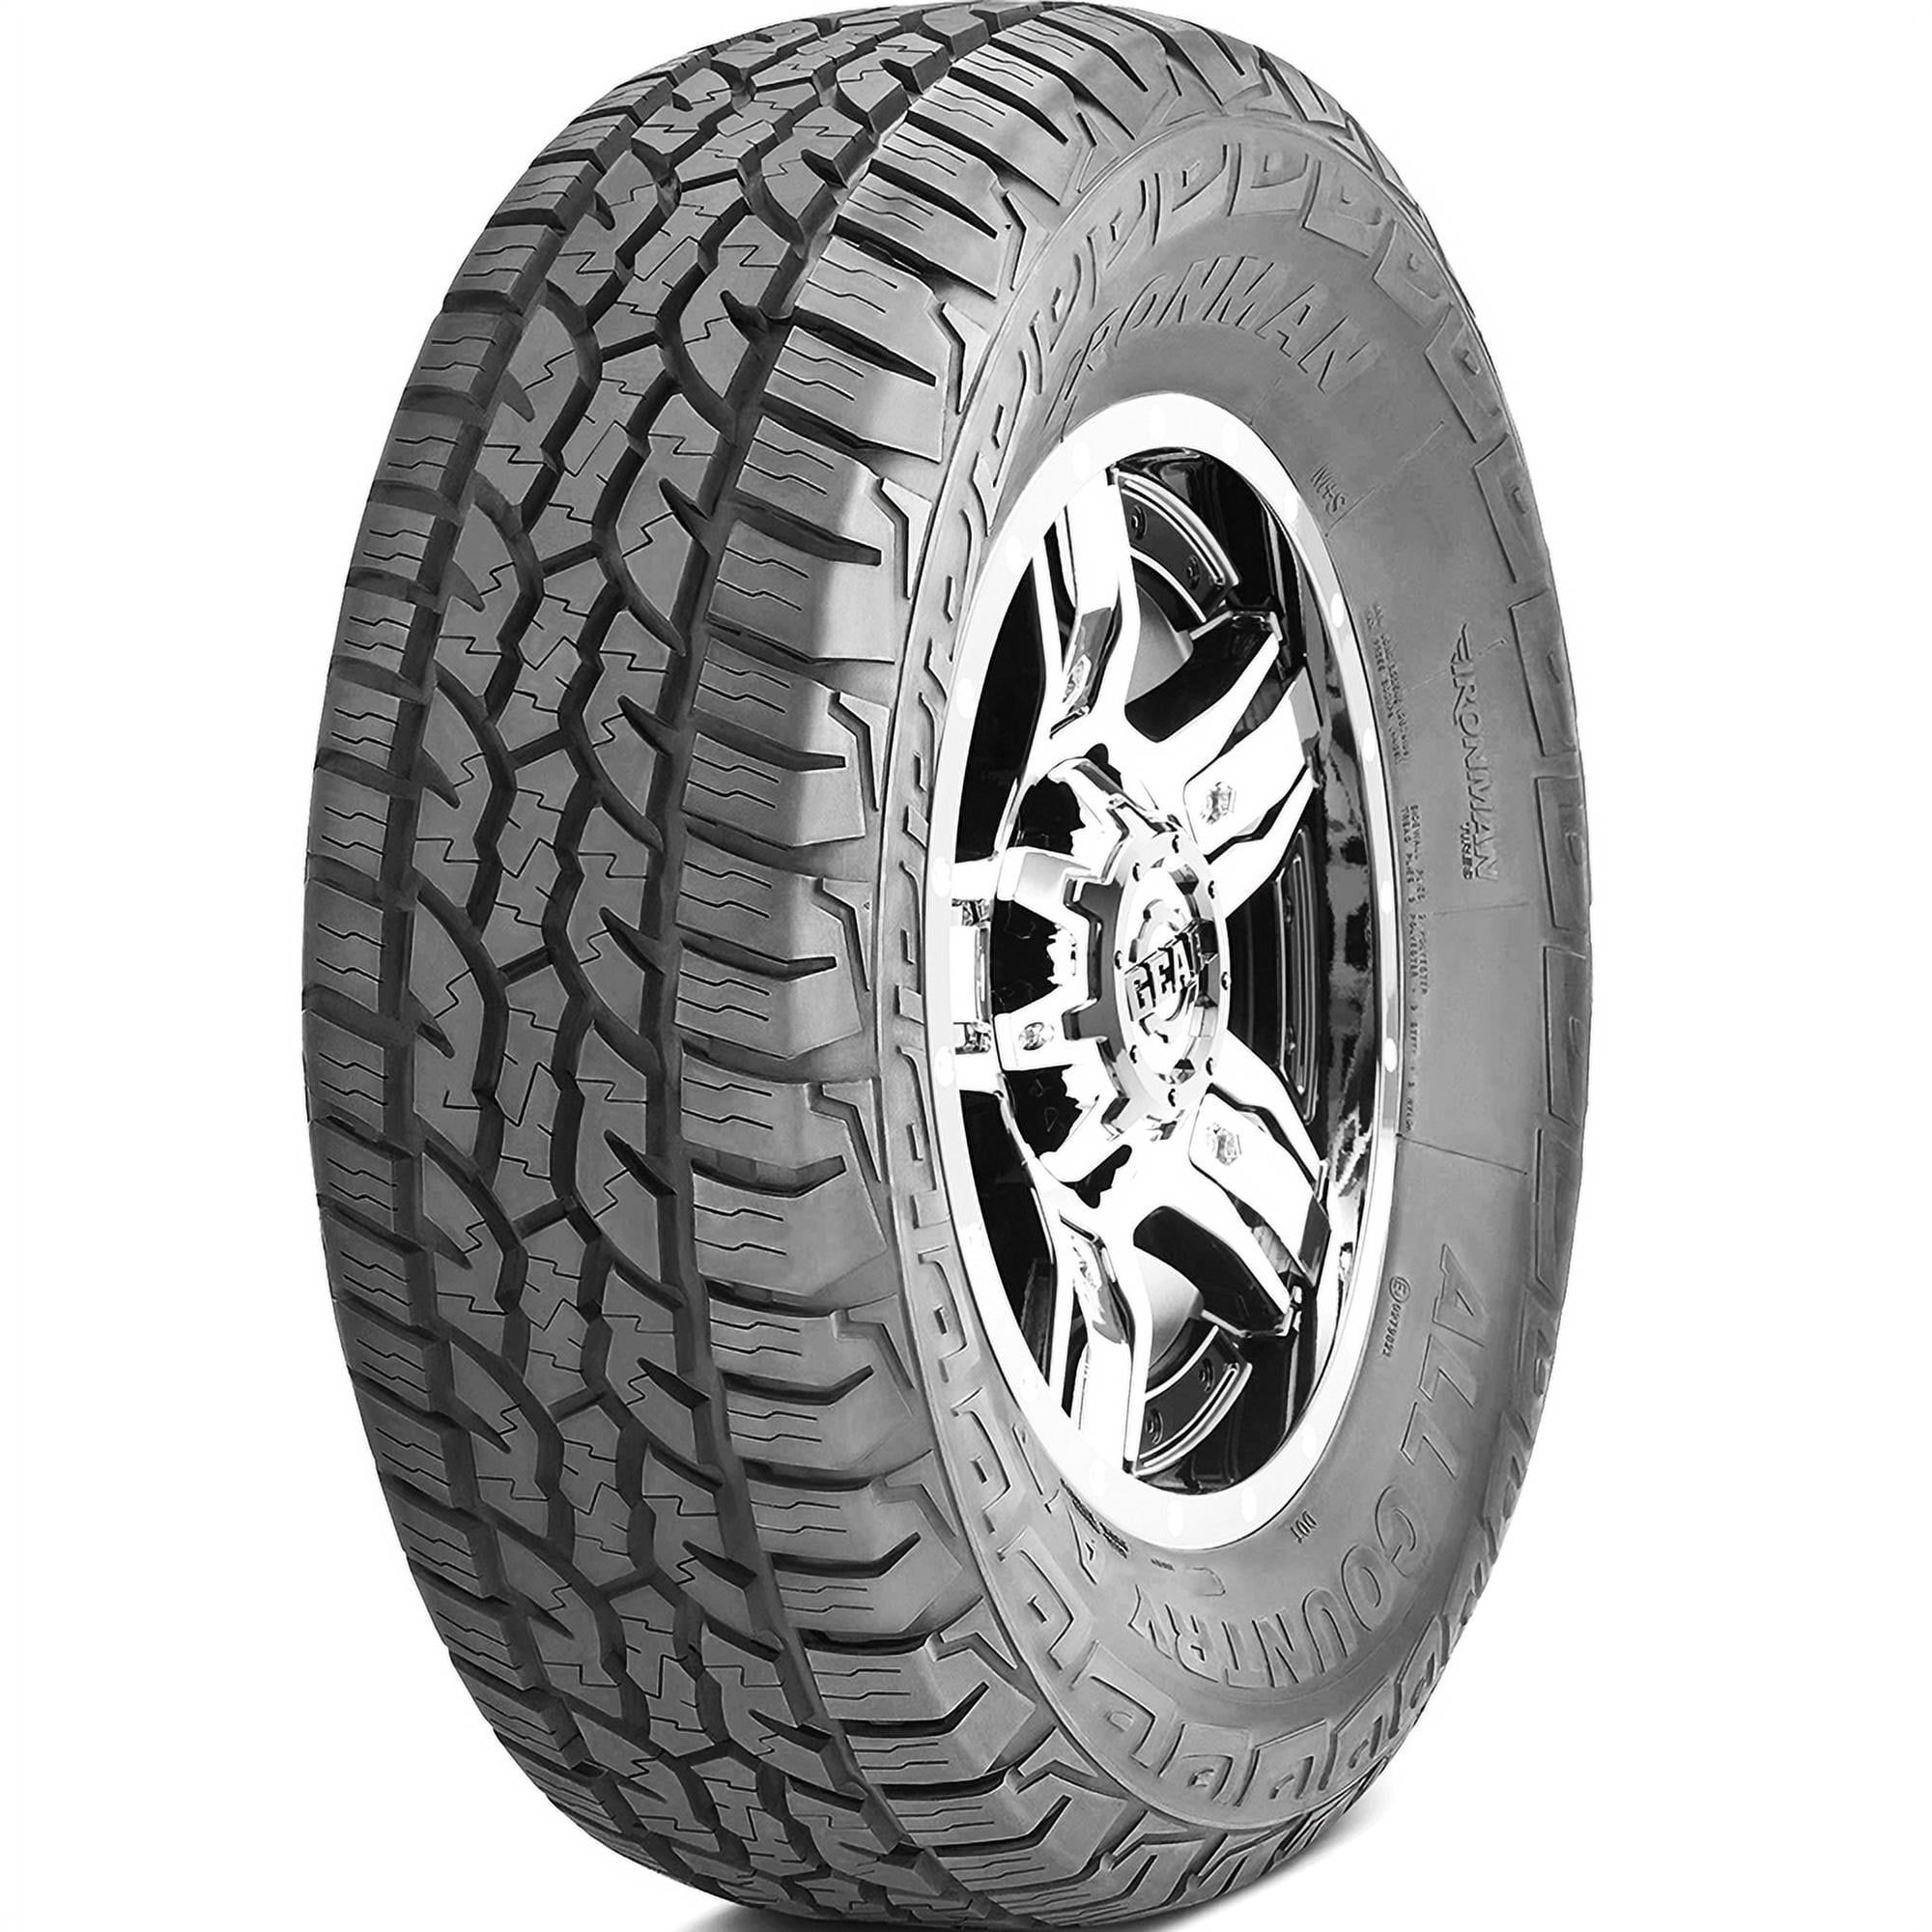 IRONMAN All Country All-Terrain Radial Tire 275/70-18 125Q 